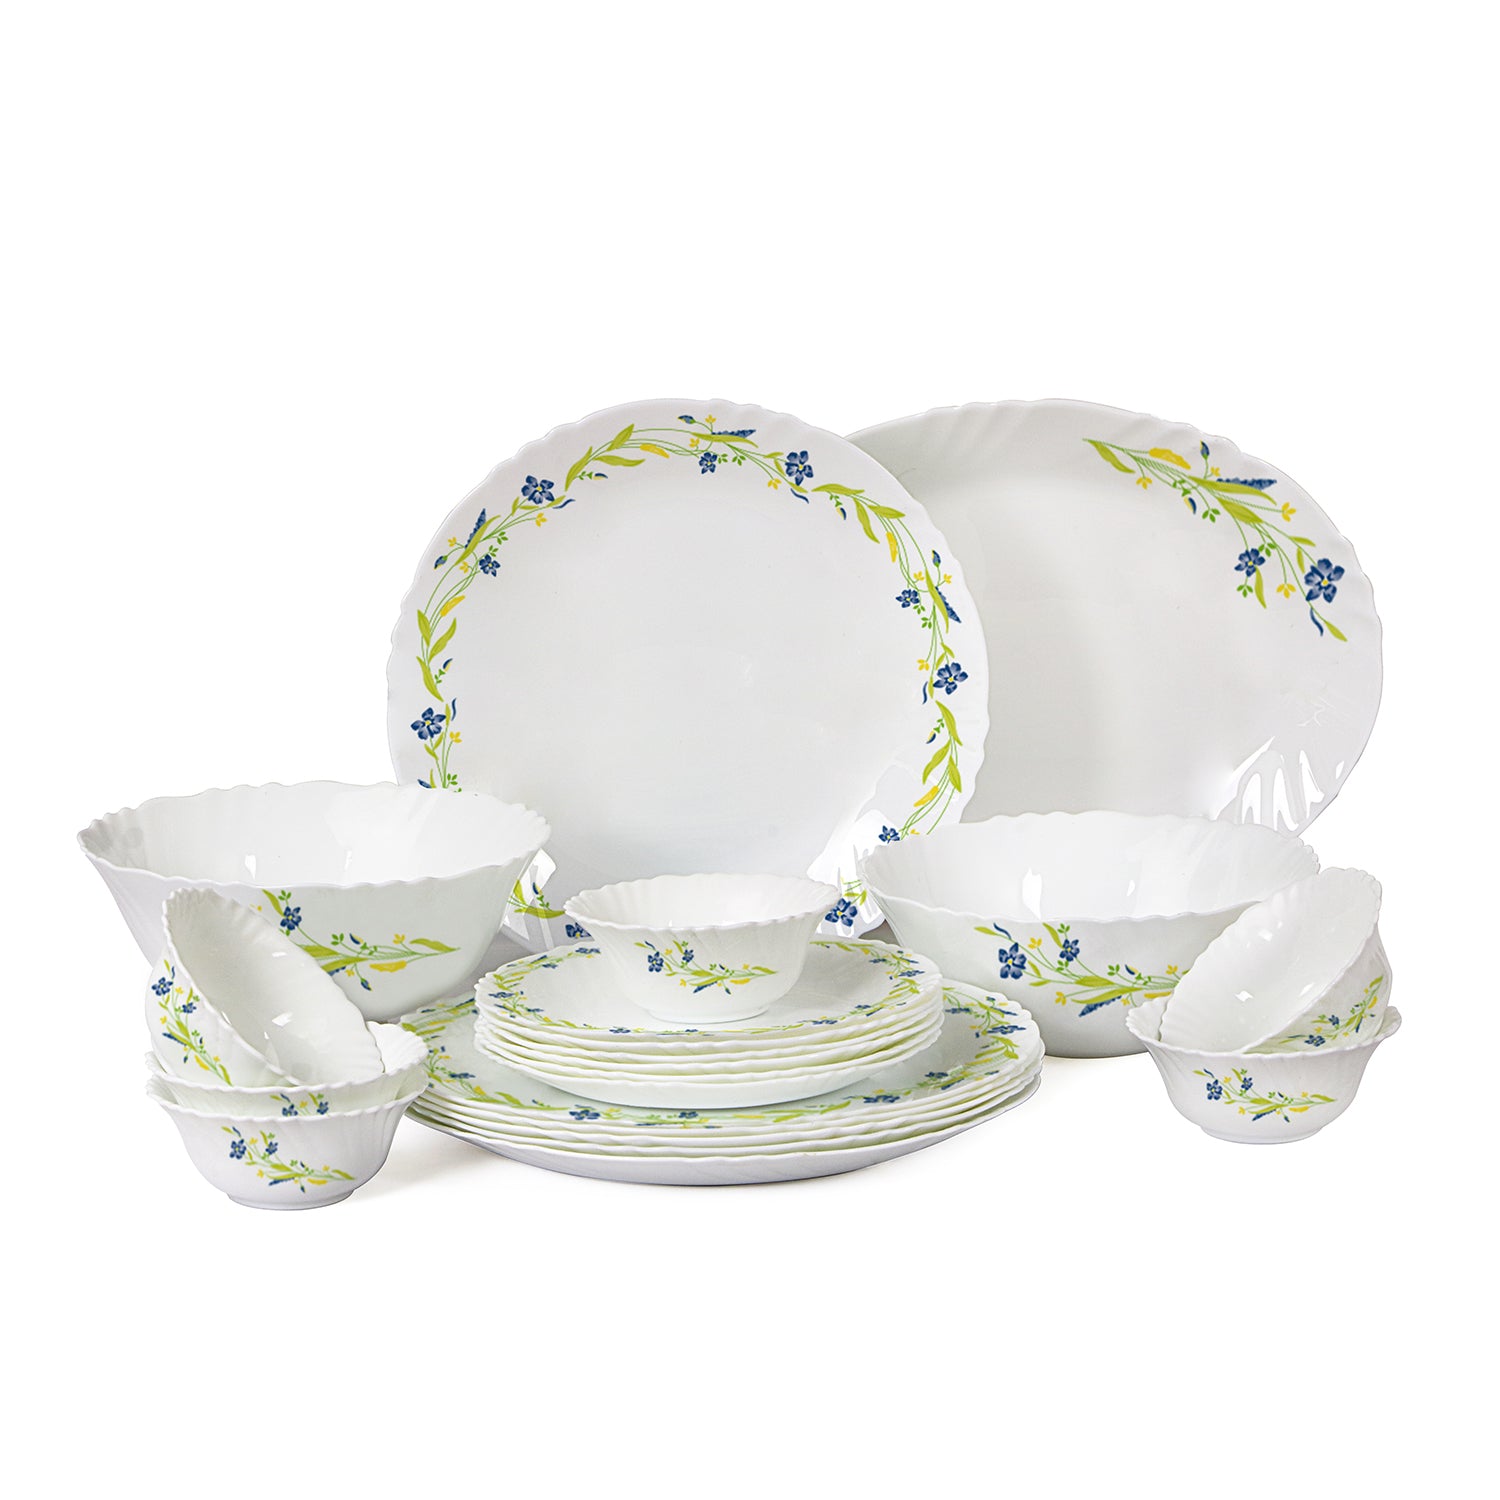 Imperial Series 21 Pieces Opalware Dinner Set for Family of 6 Amazon Creeper